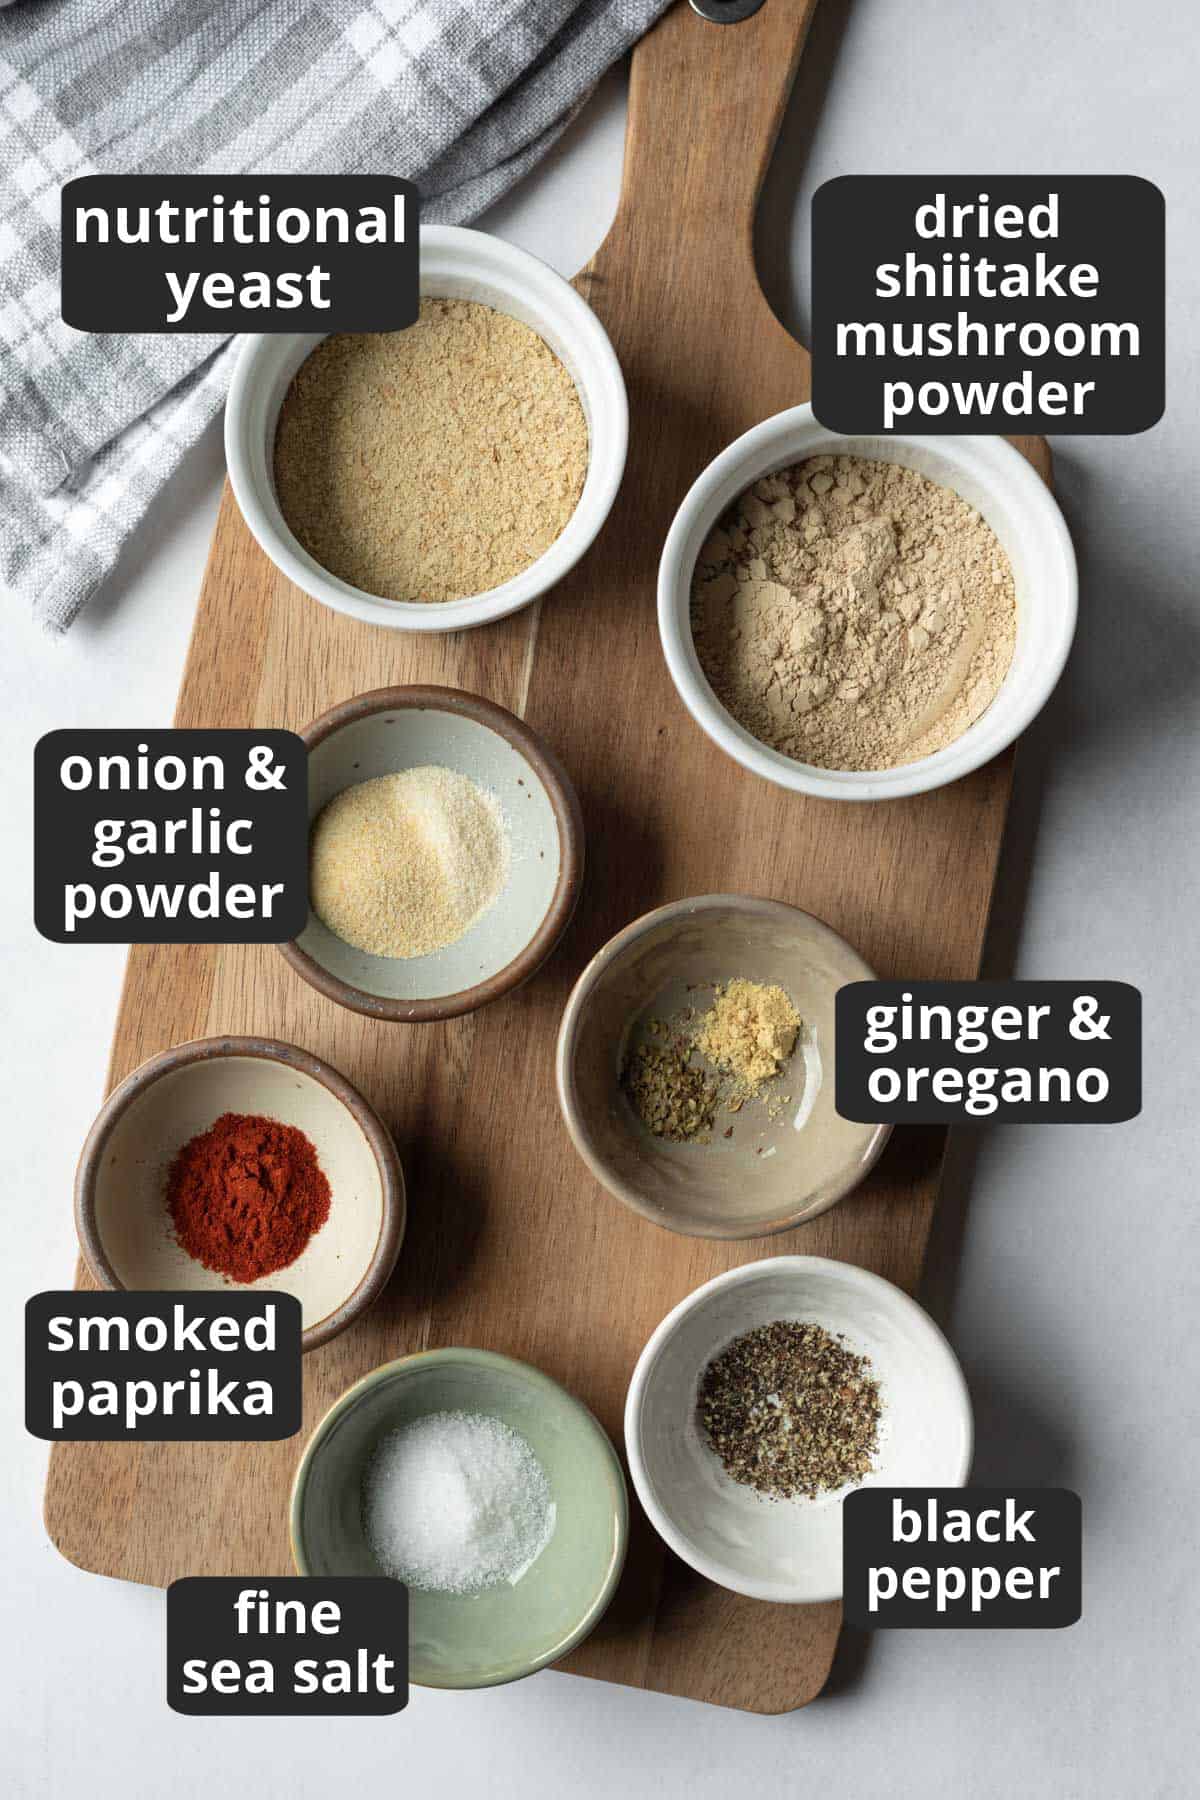 labeled photo of the 9 ingredients needed for the recipe.